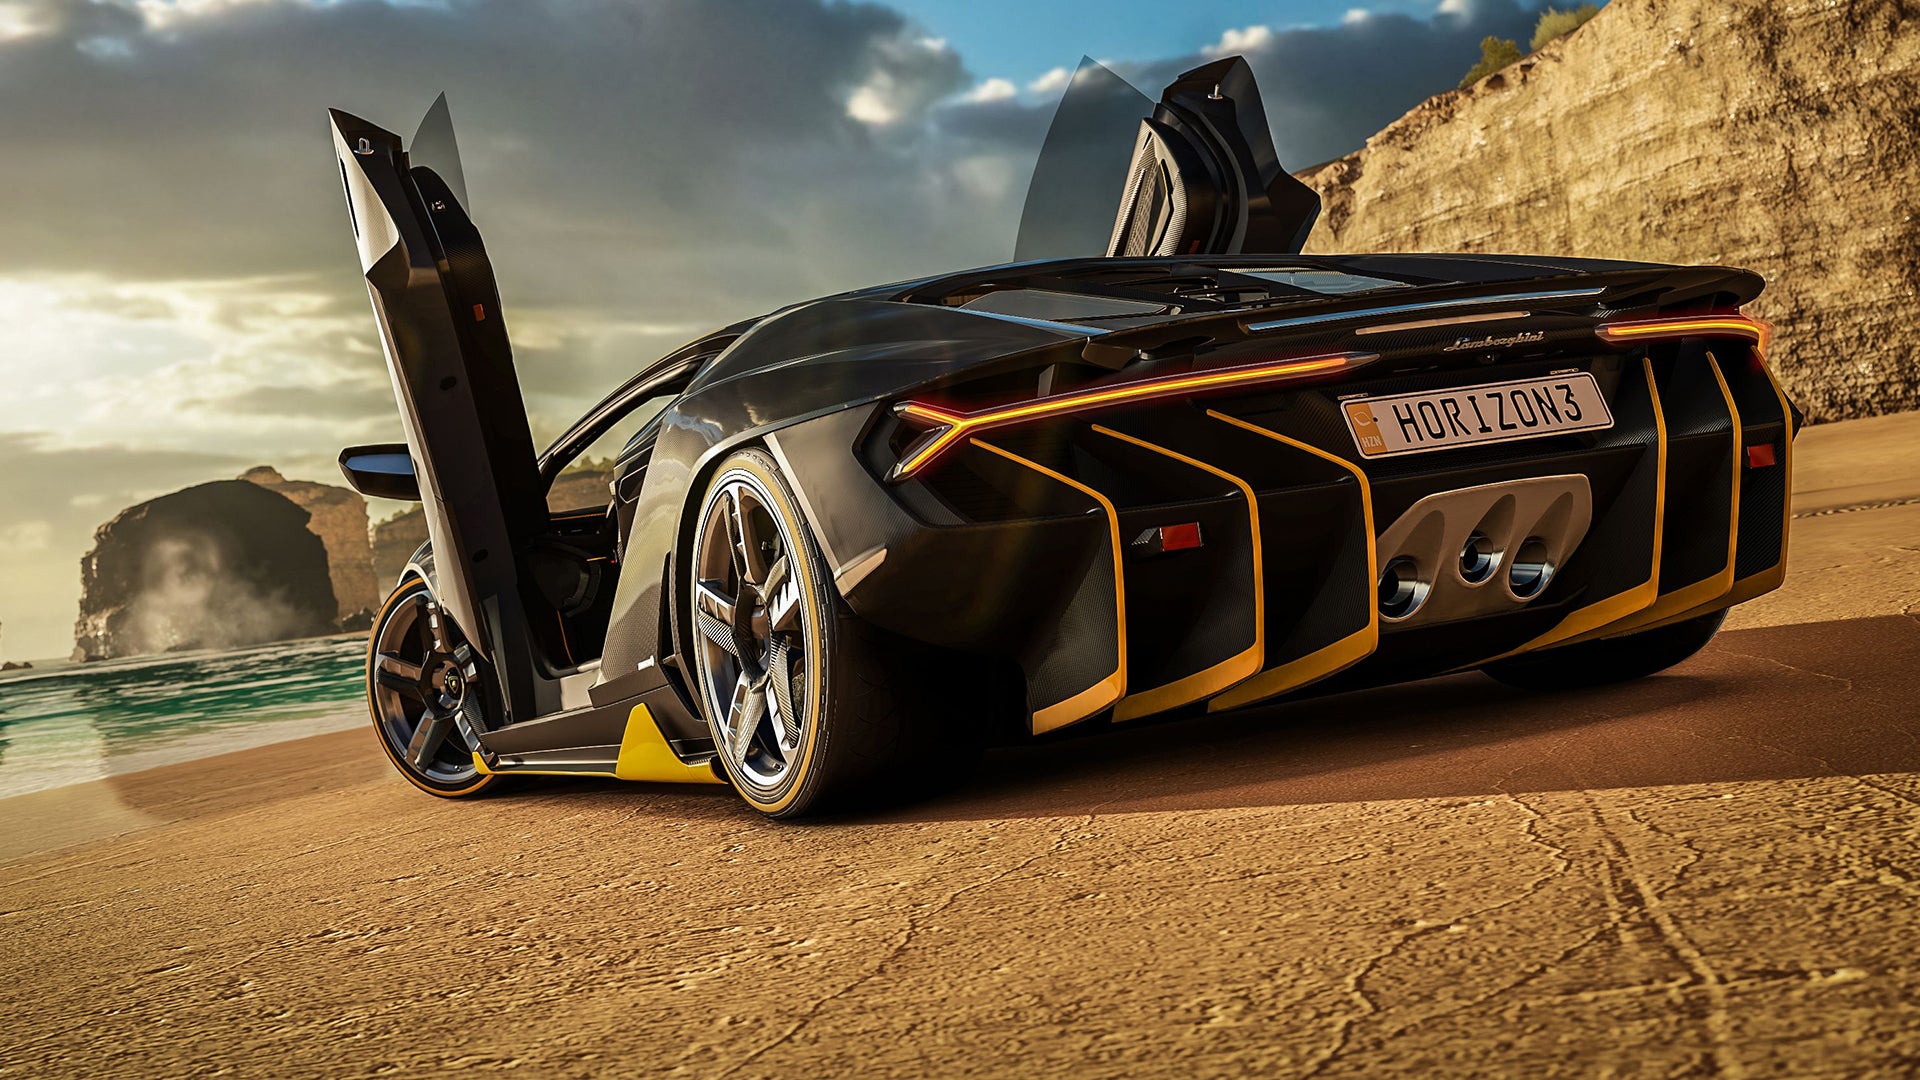 Image for Forza Horizon 3: Xbox One X Full Developer Interview in 4K/HDR!